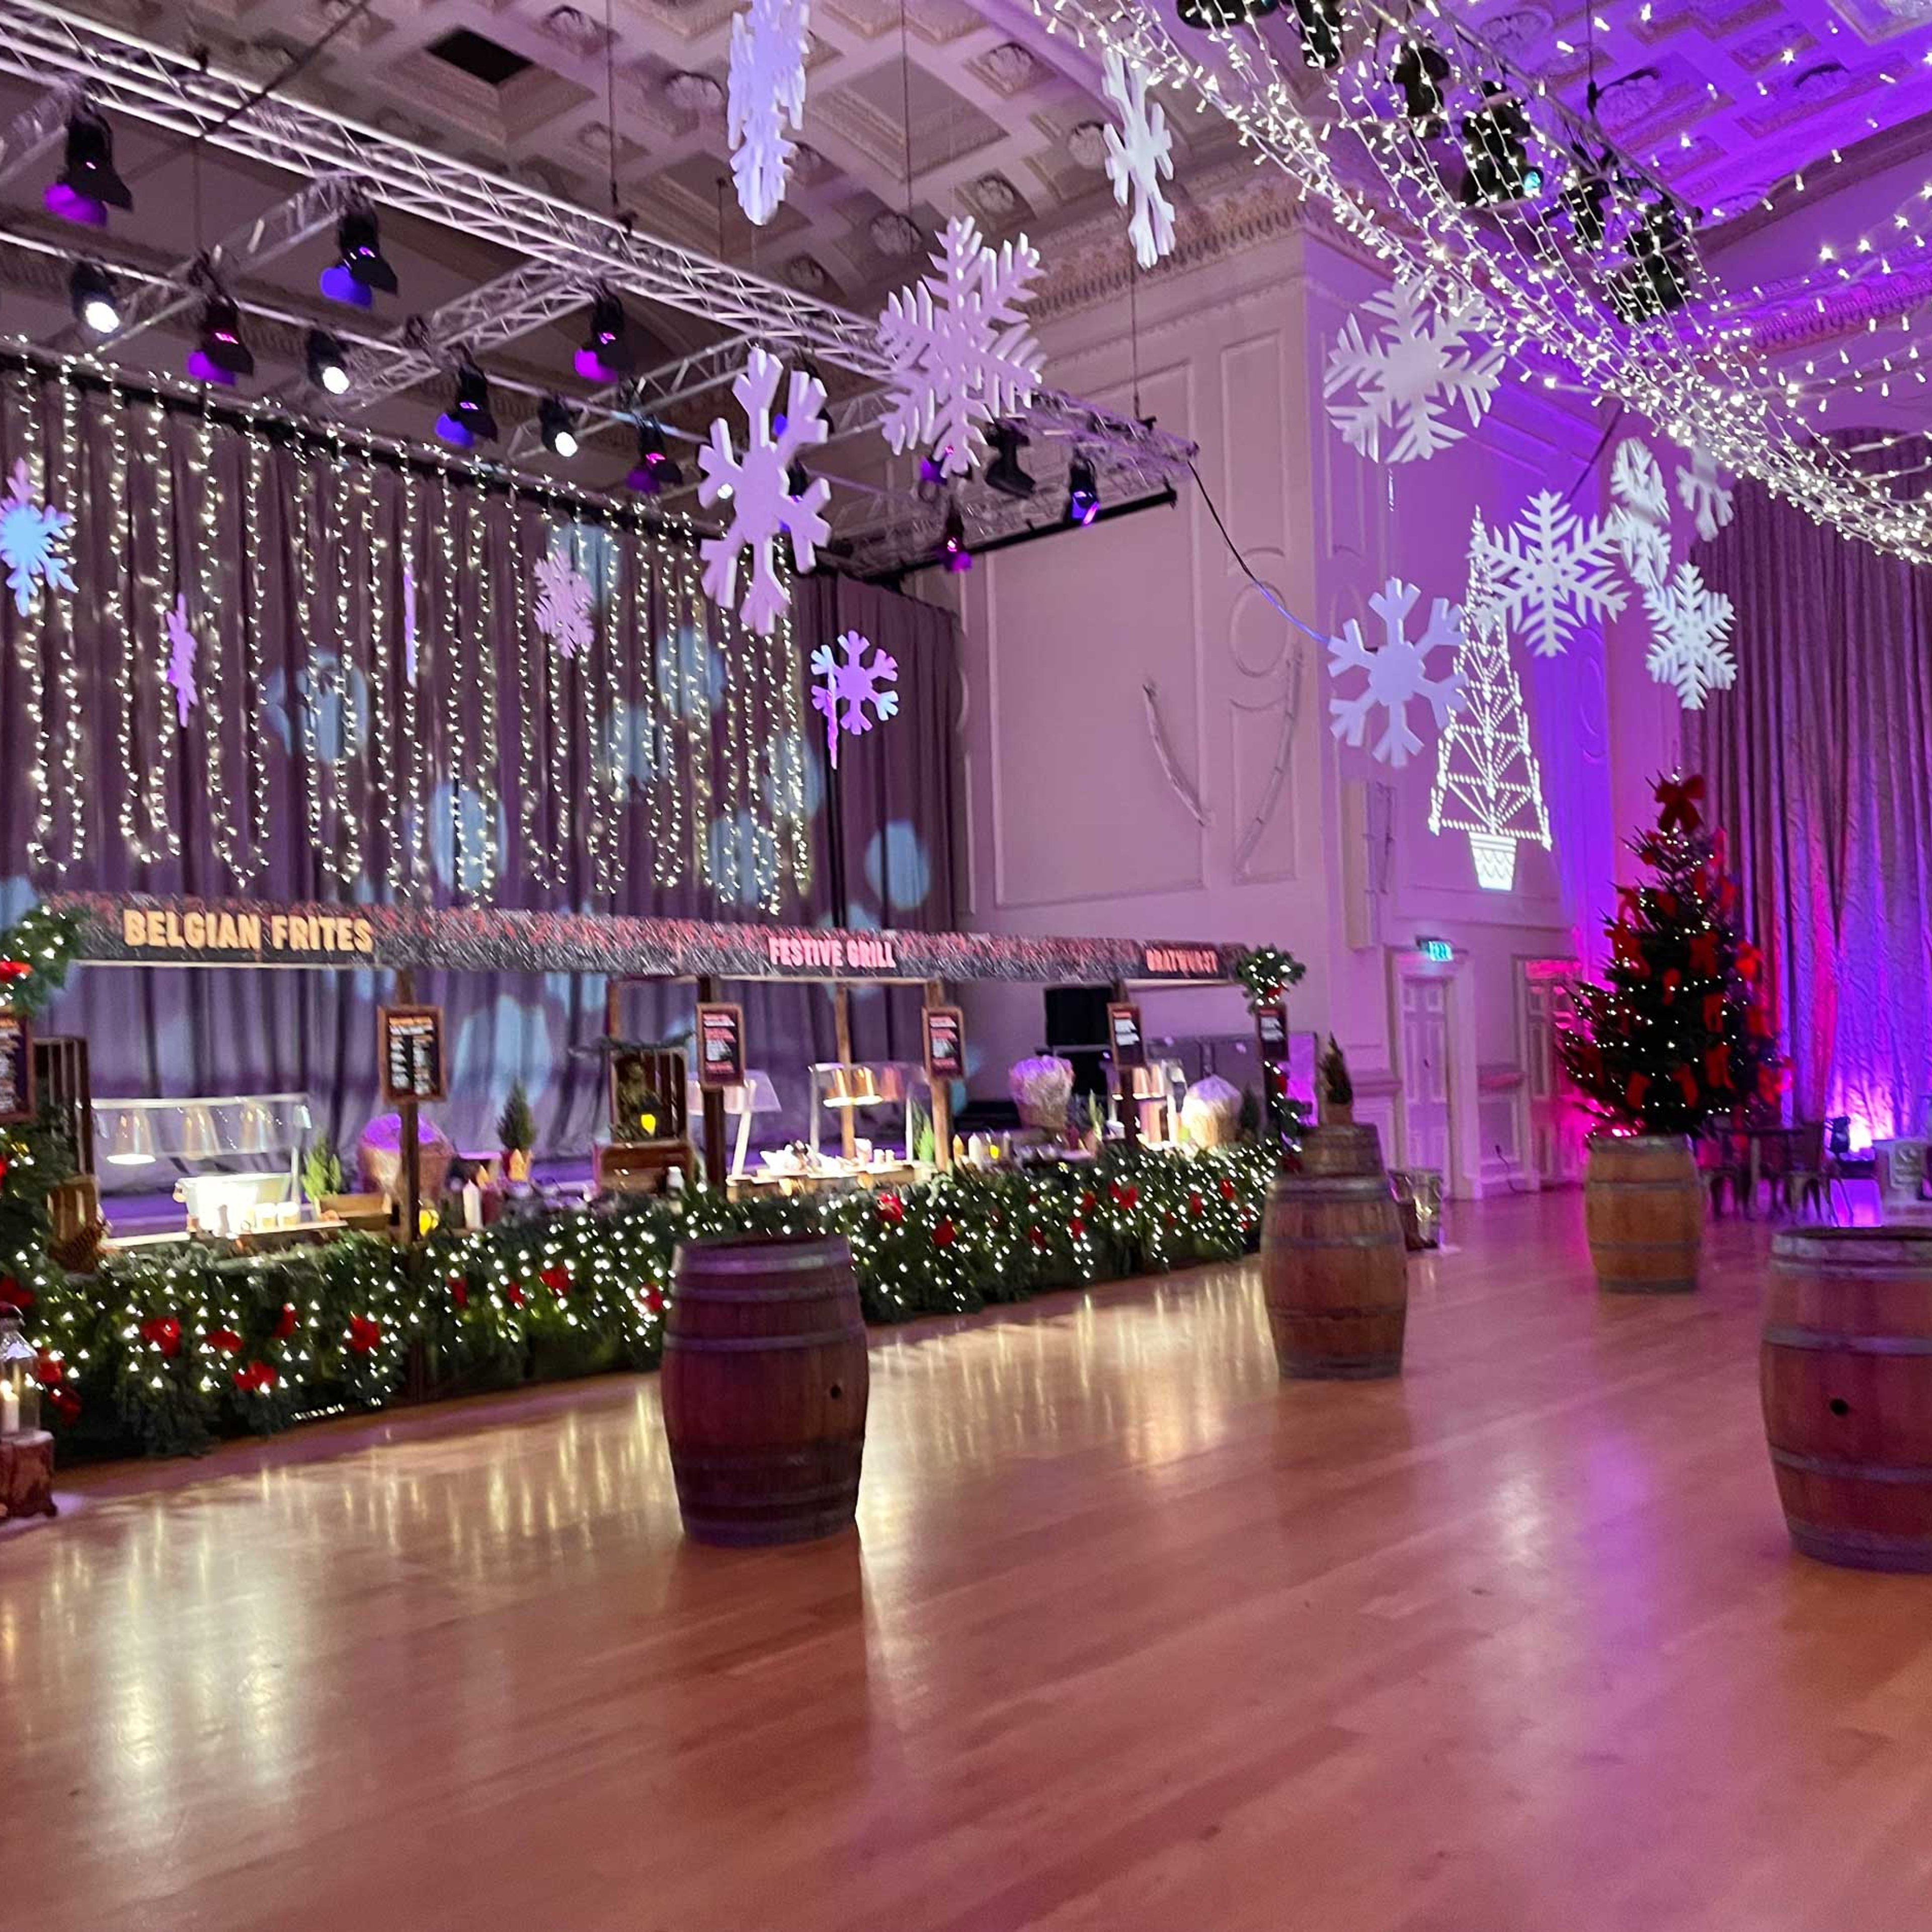 Interior of the Assembly Rooms Edinburgh decorated with food stalls and Christmas lights.